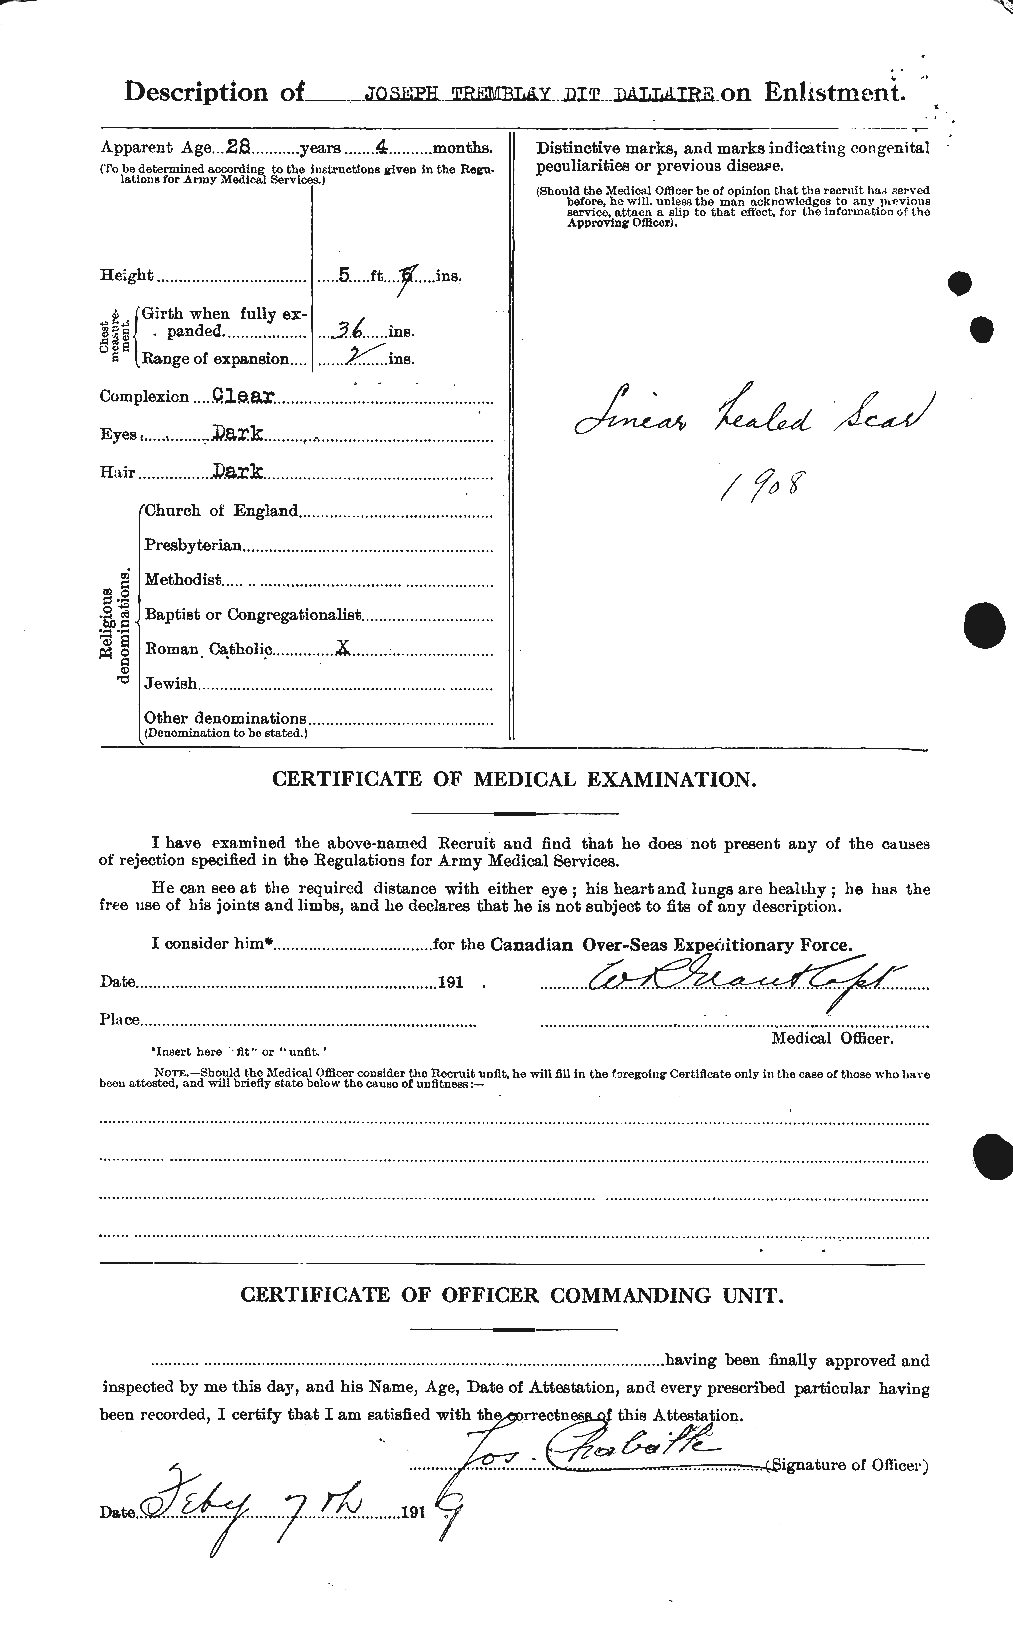 Personnel Records of the First World War - CEF 639136b